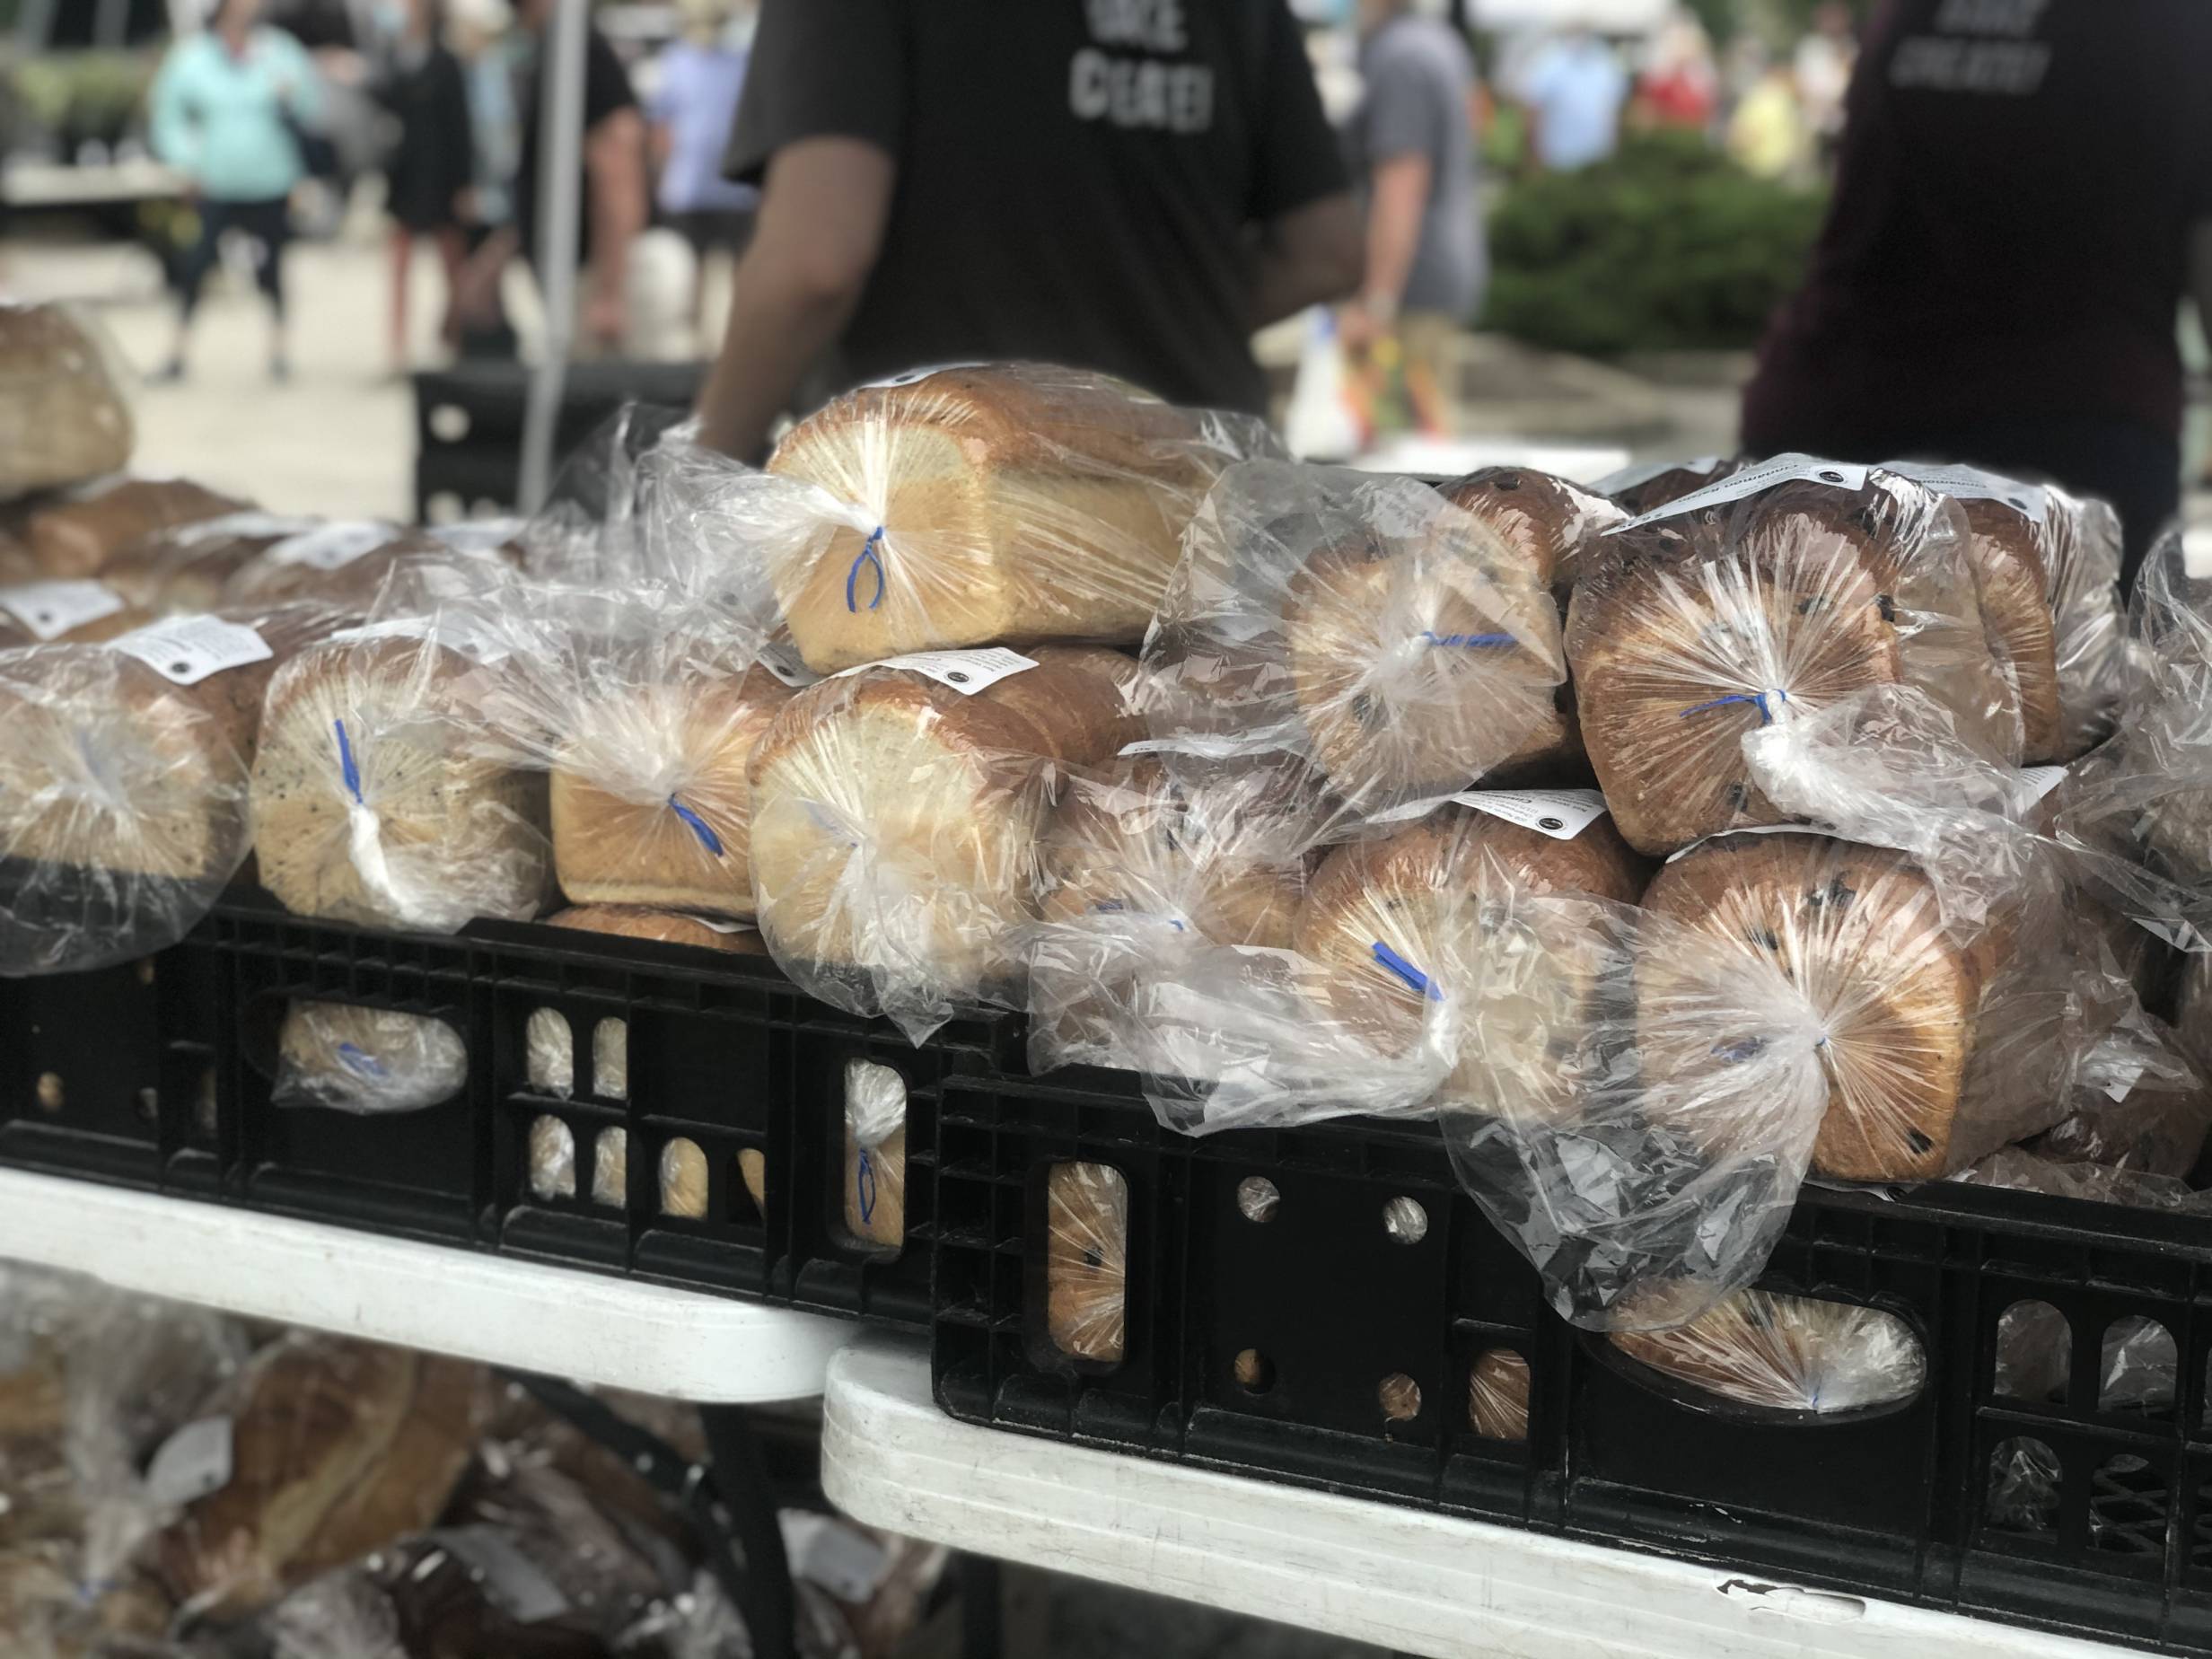 Black containers hold loaves of fresh bread, wrapped in plastic cellophane, tied with little blue twist-ties. Photo by Alyssa Buckley.